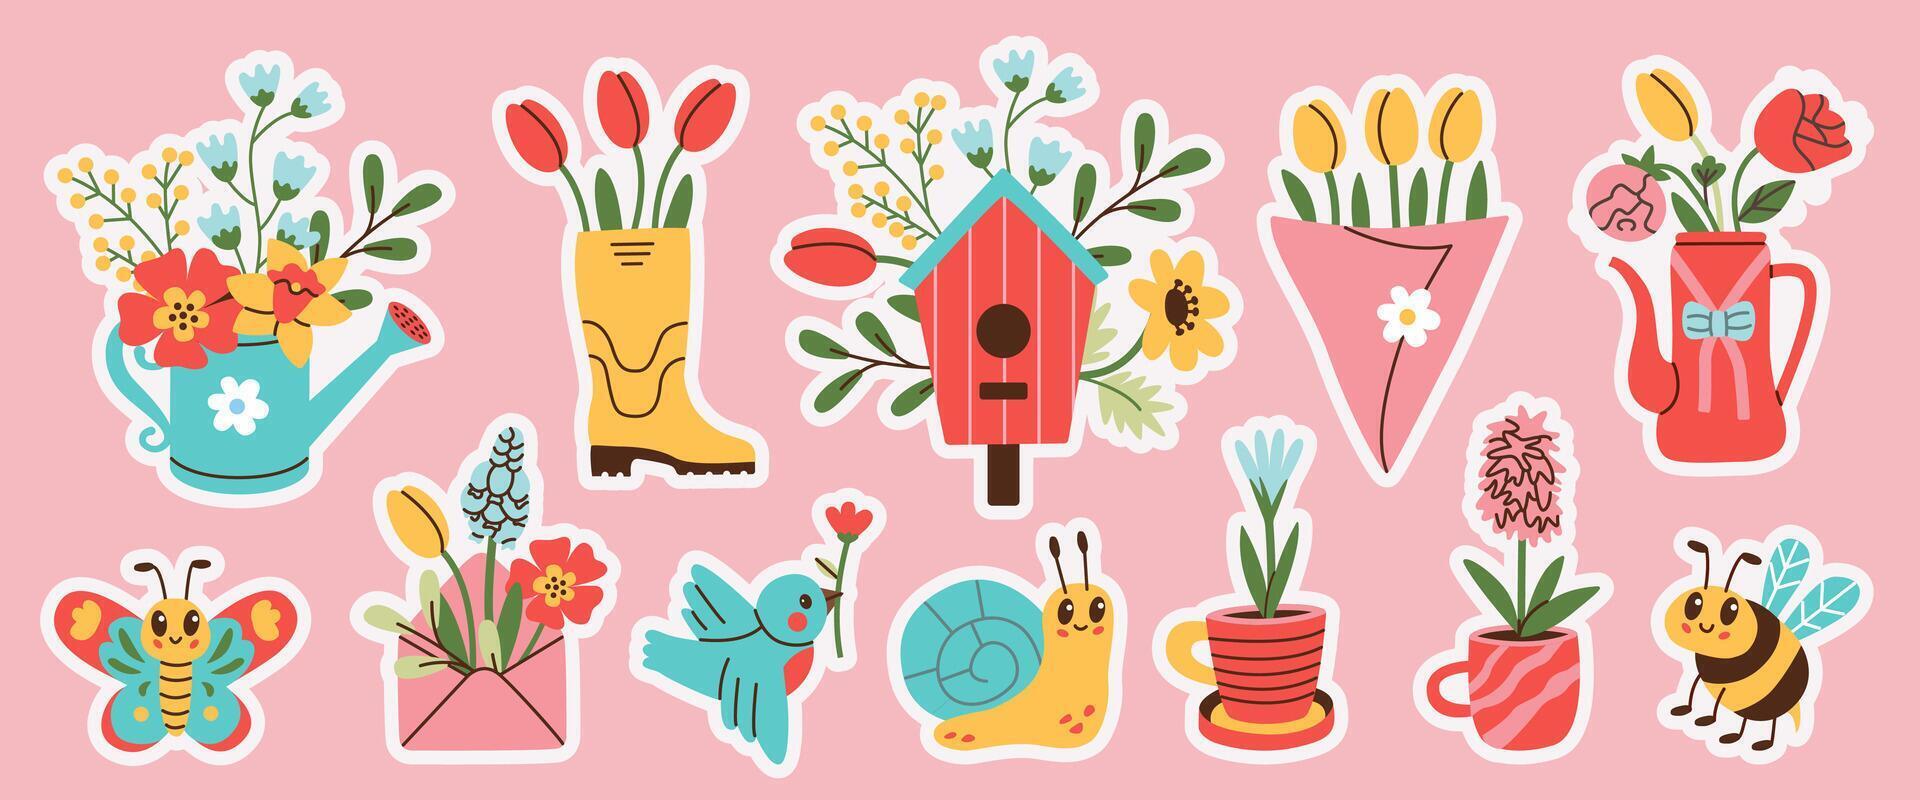 Stickers set of spring hand drawn elements. Floral decor. Flowers, branches, bouquets, watering can, teapot, birdhouse. vector